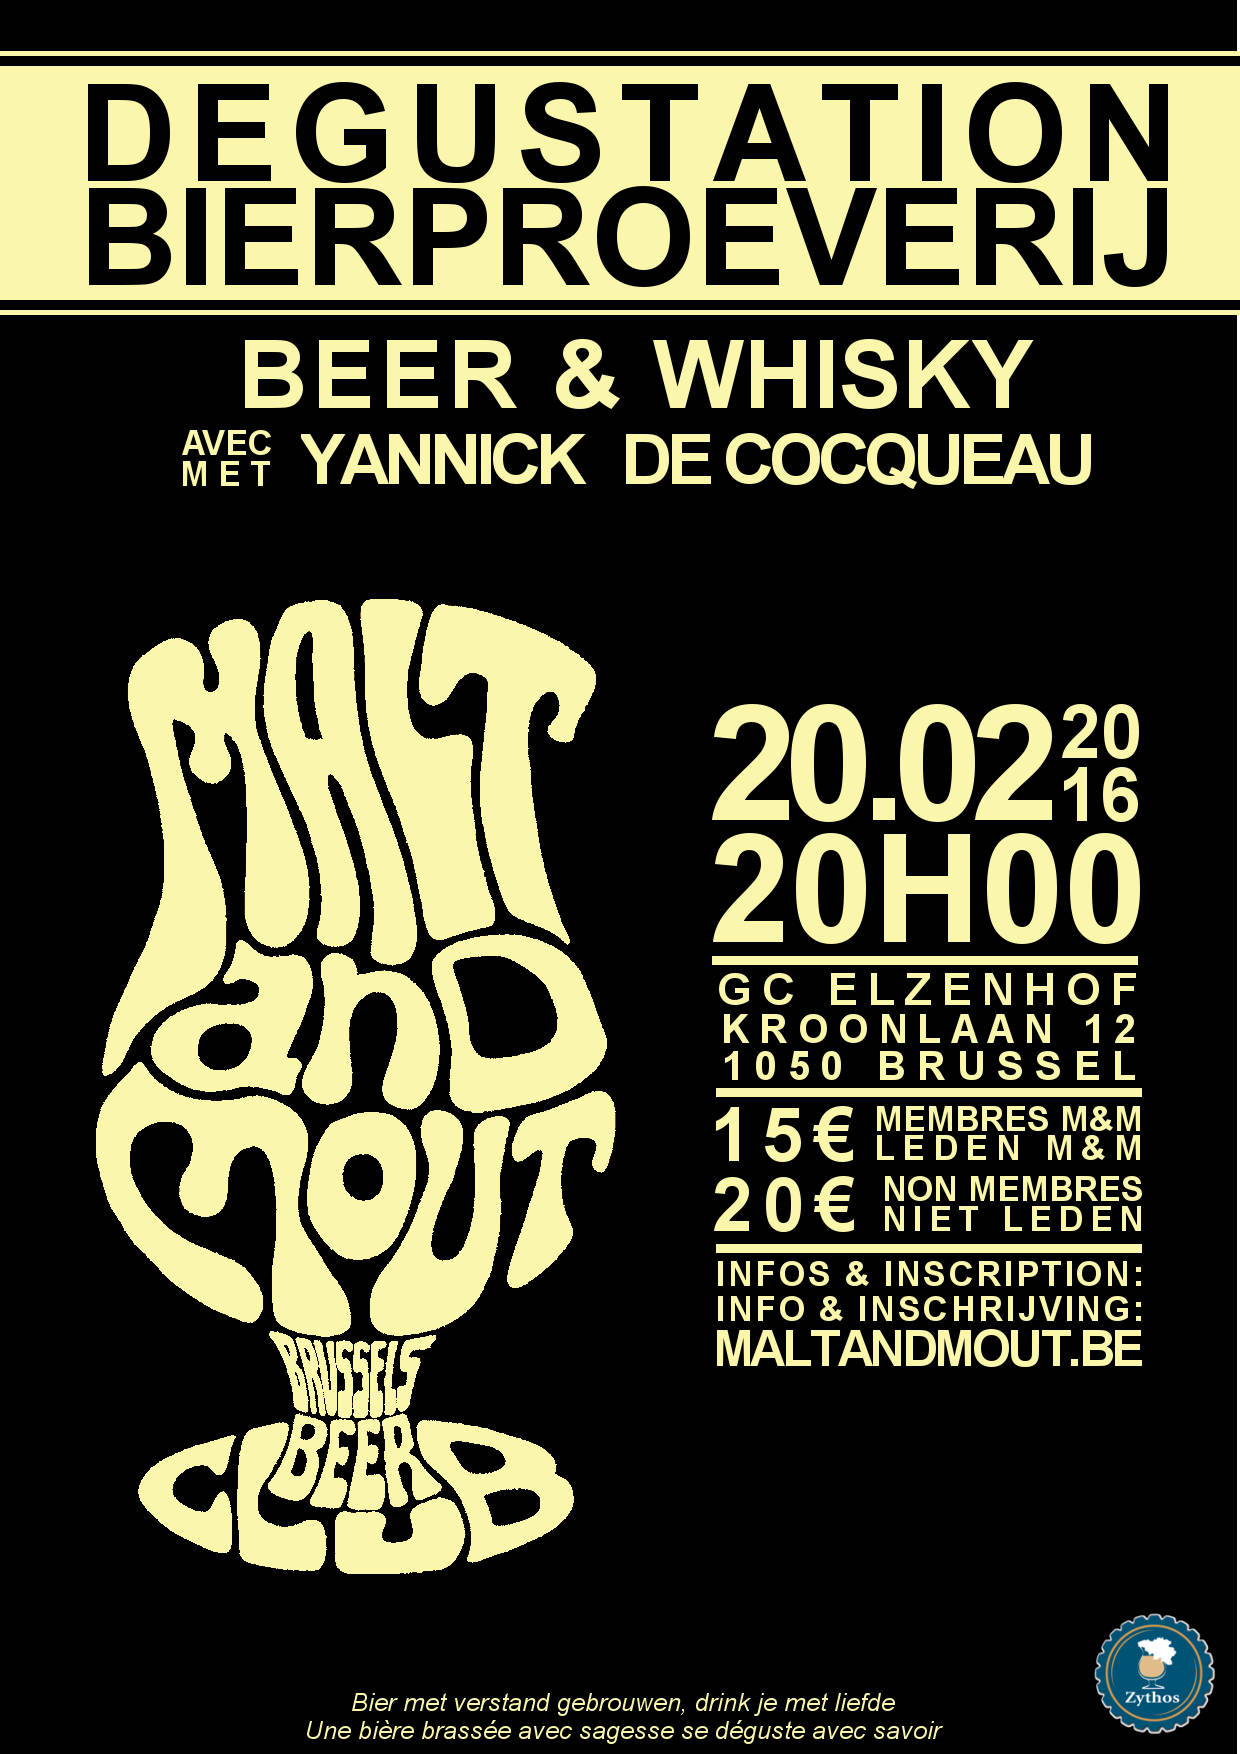 Beer & Whisky